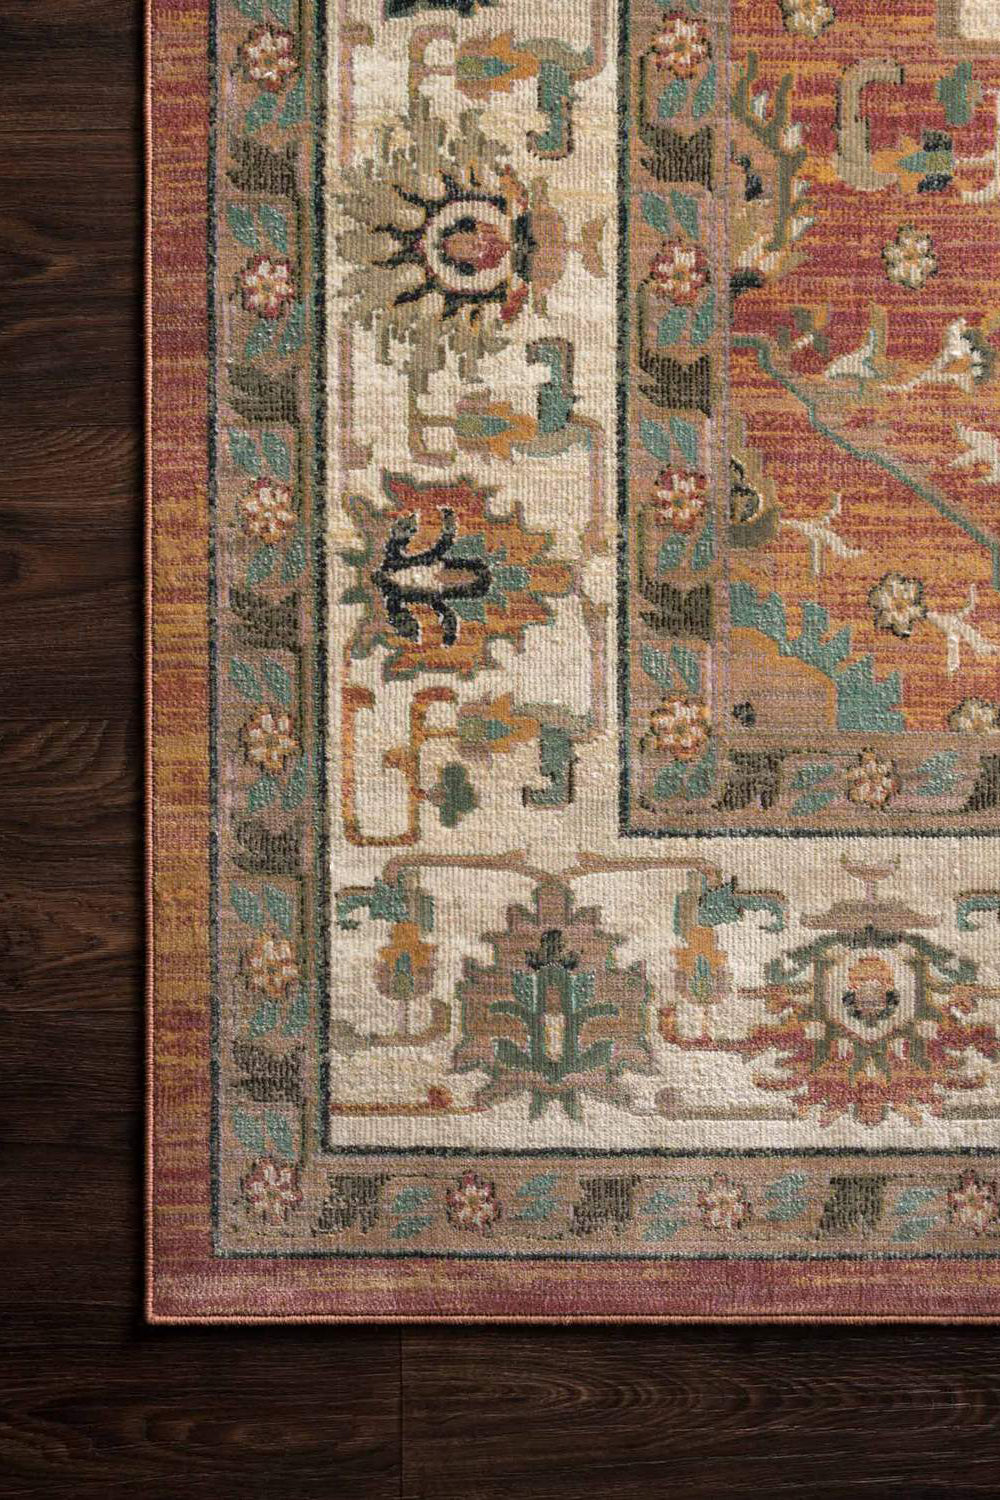 Antique Traditional Rug - 112 Rust